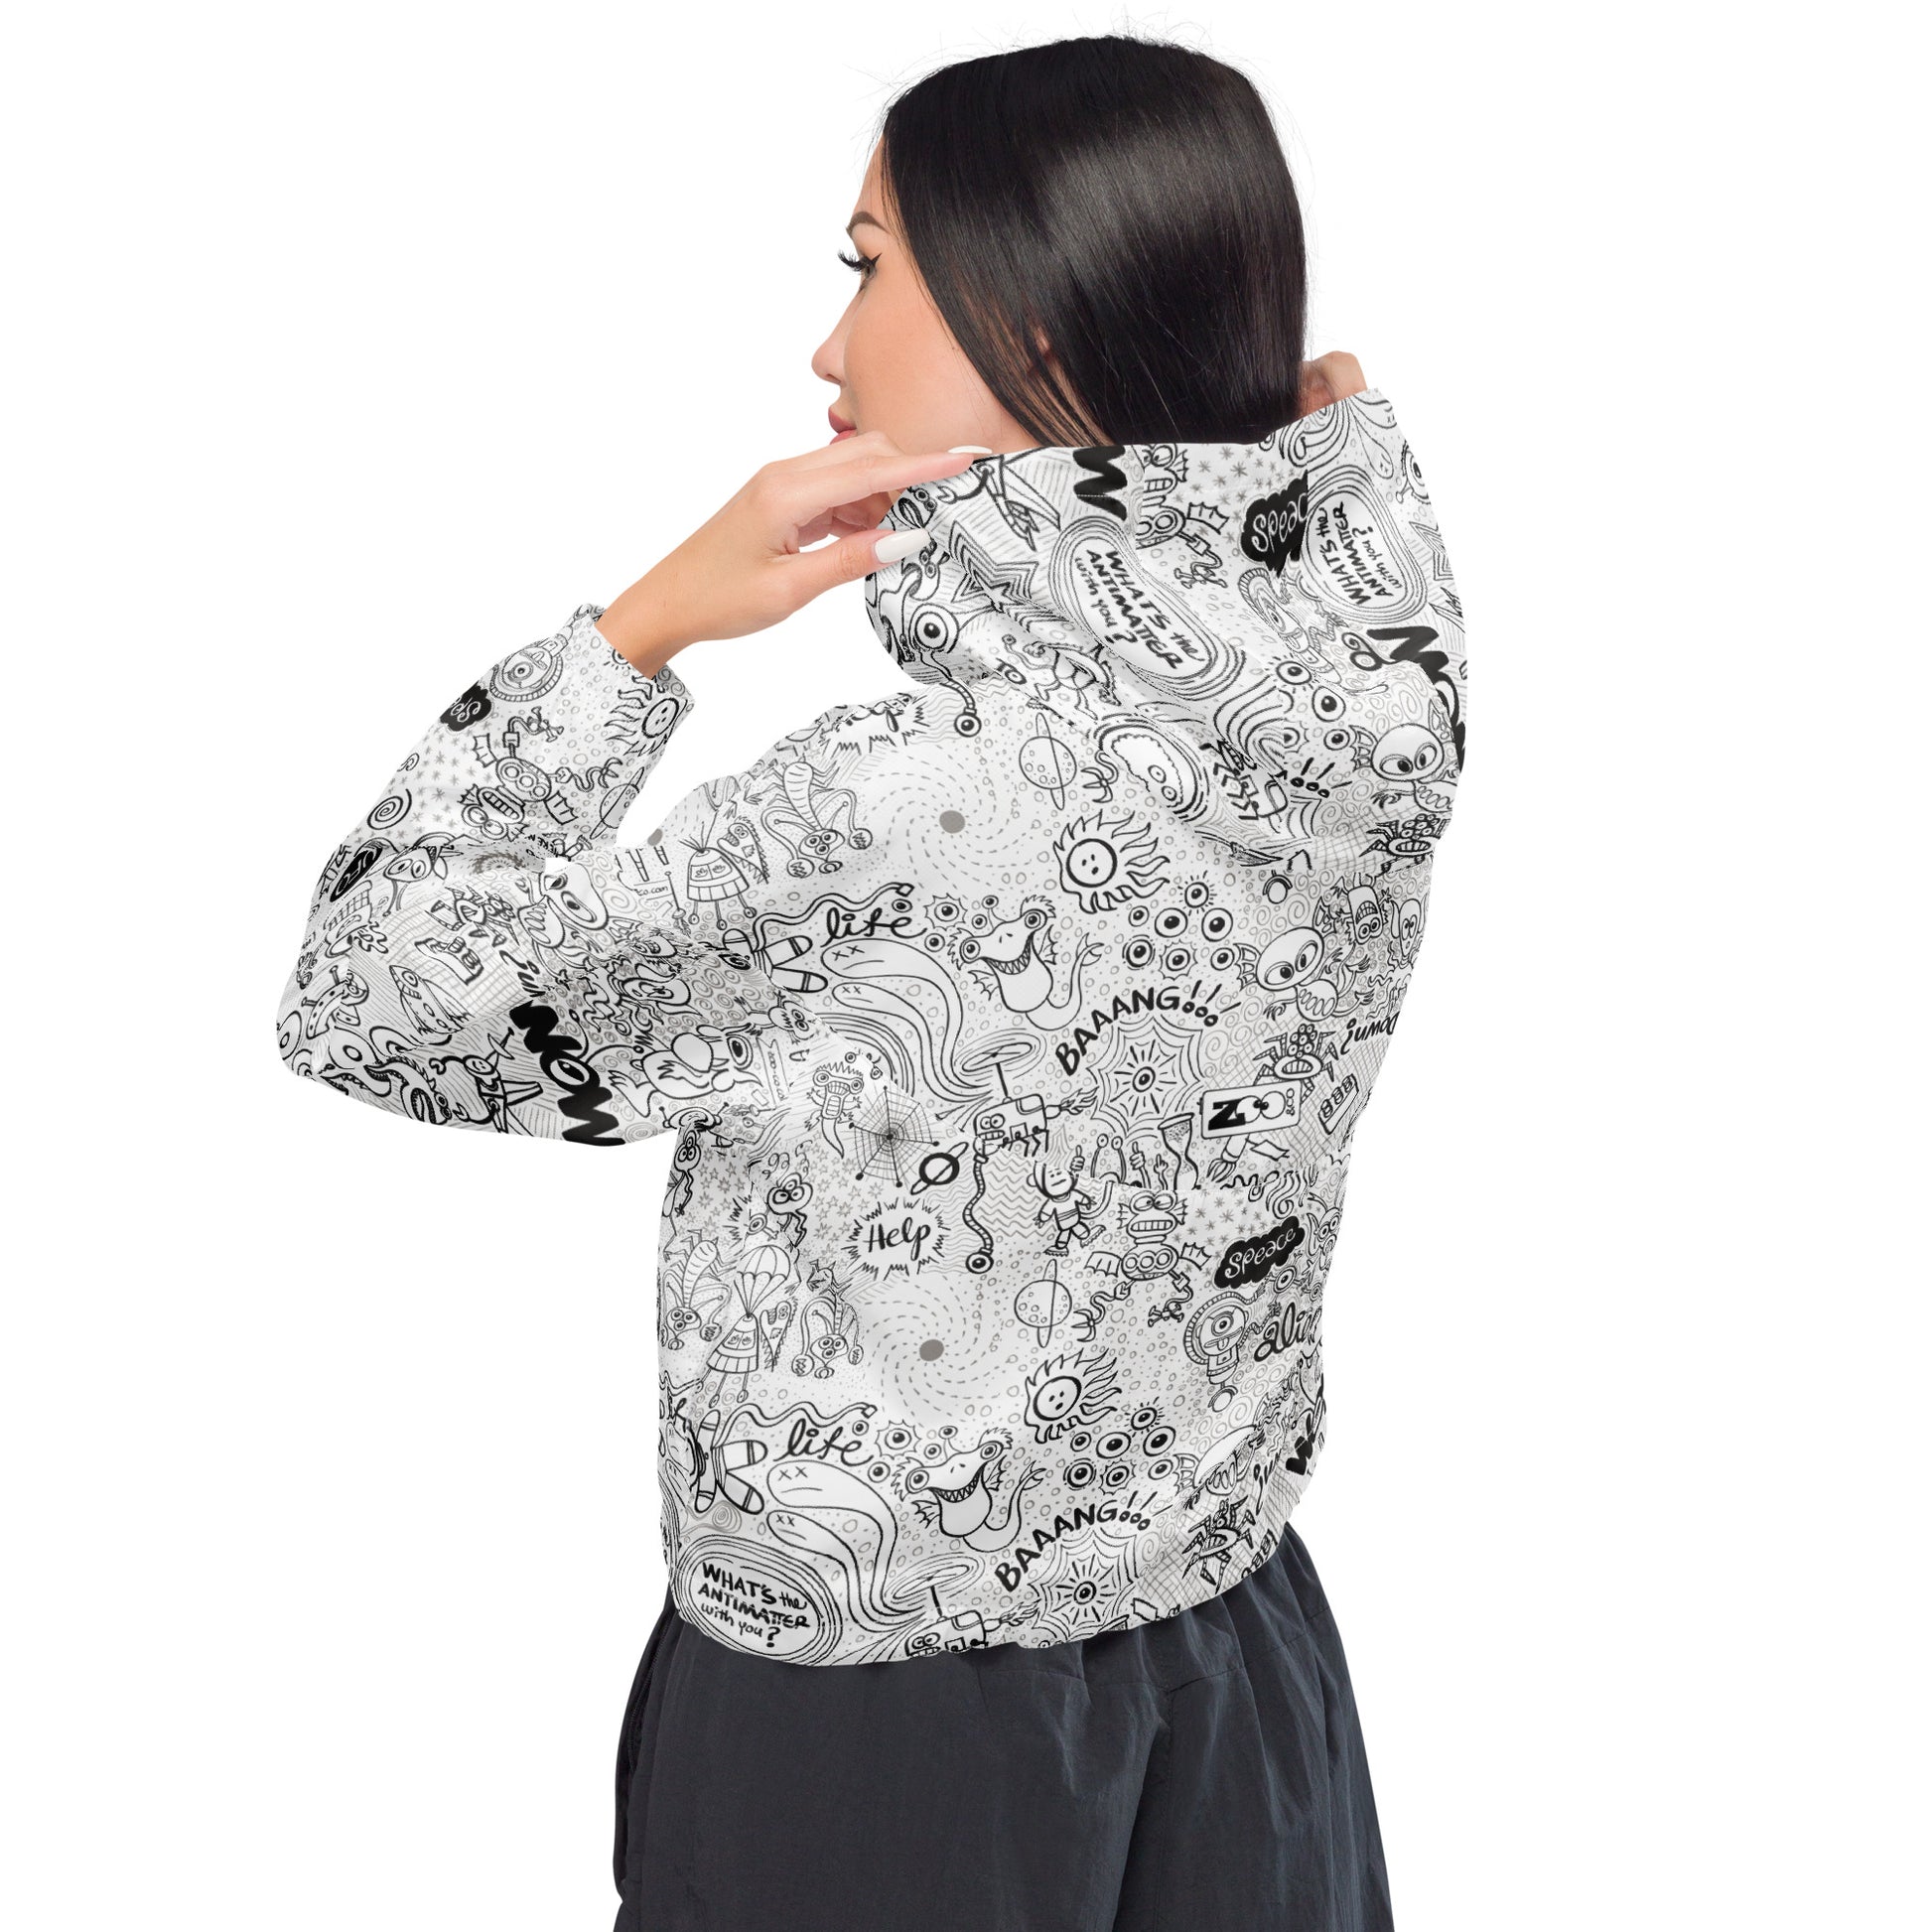 Celebrating the most comprehensive Doodle art of the universe Women’s cropped windbreaker. Back view